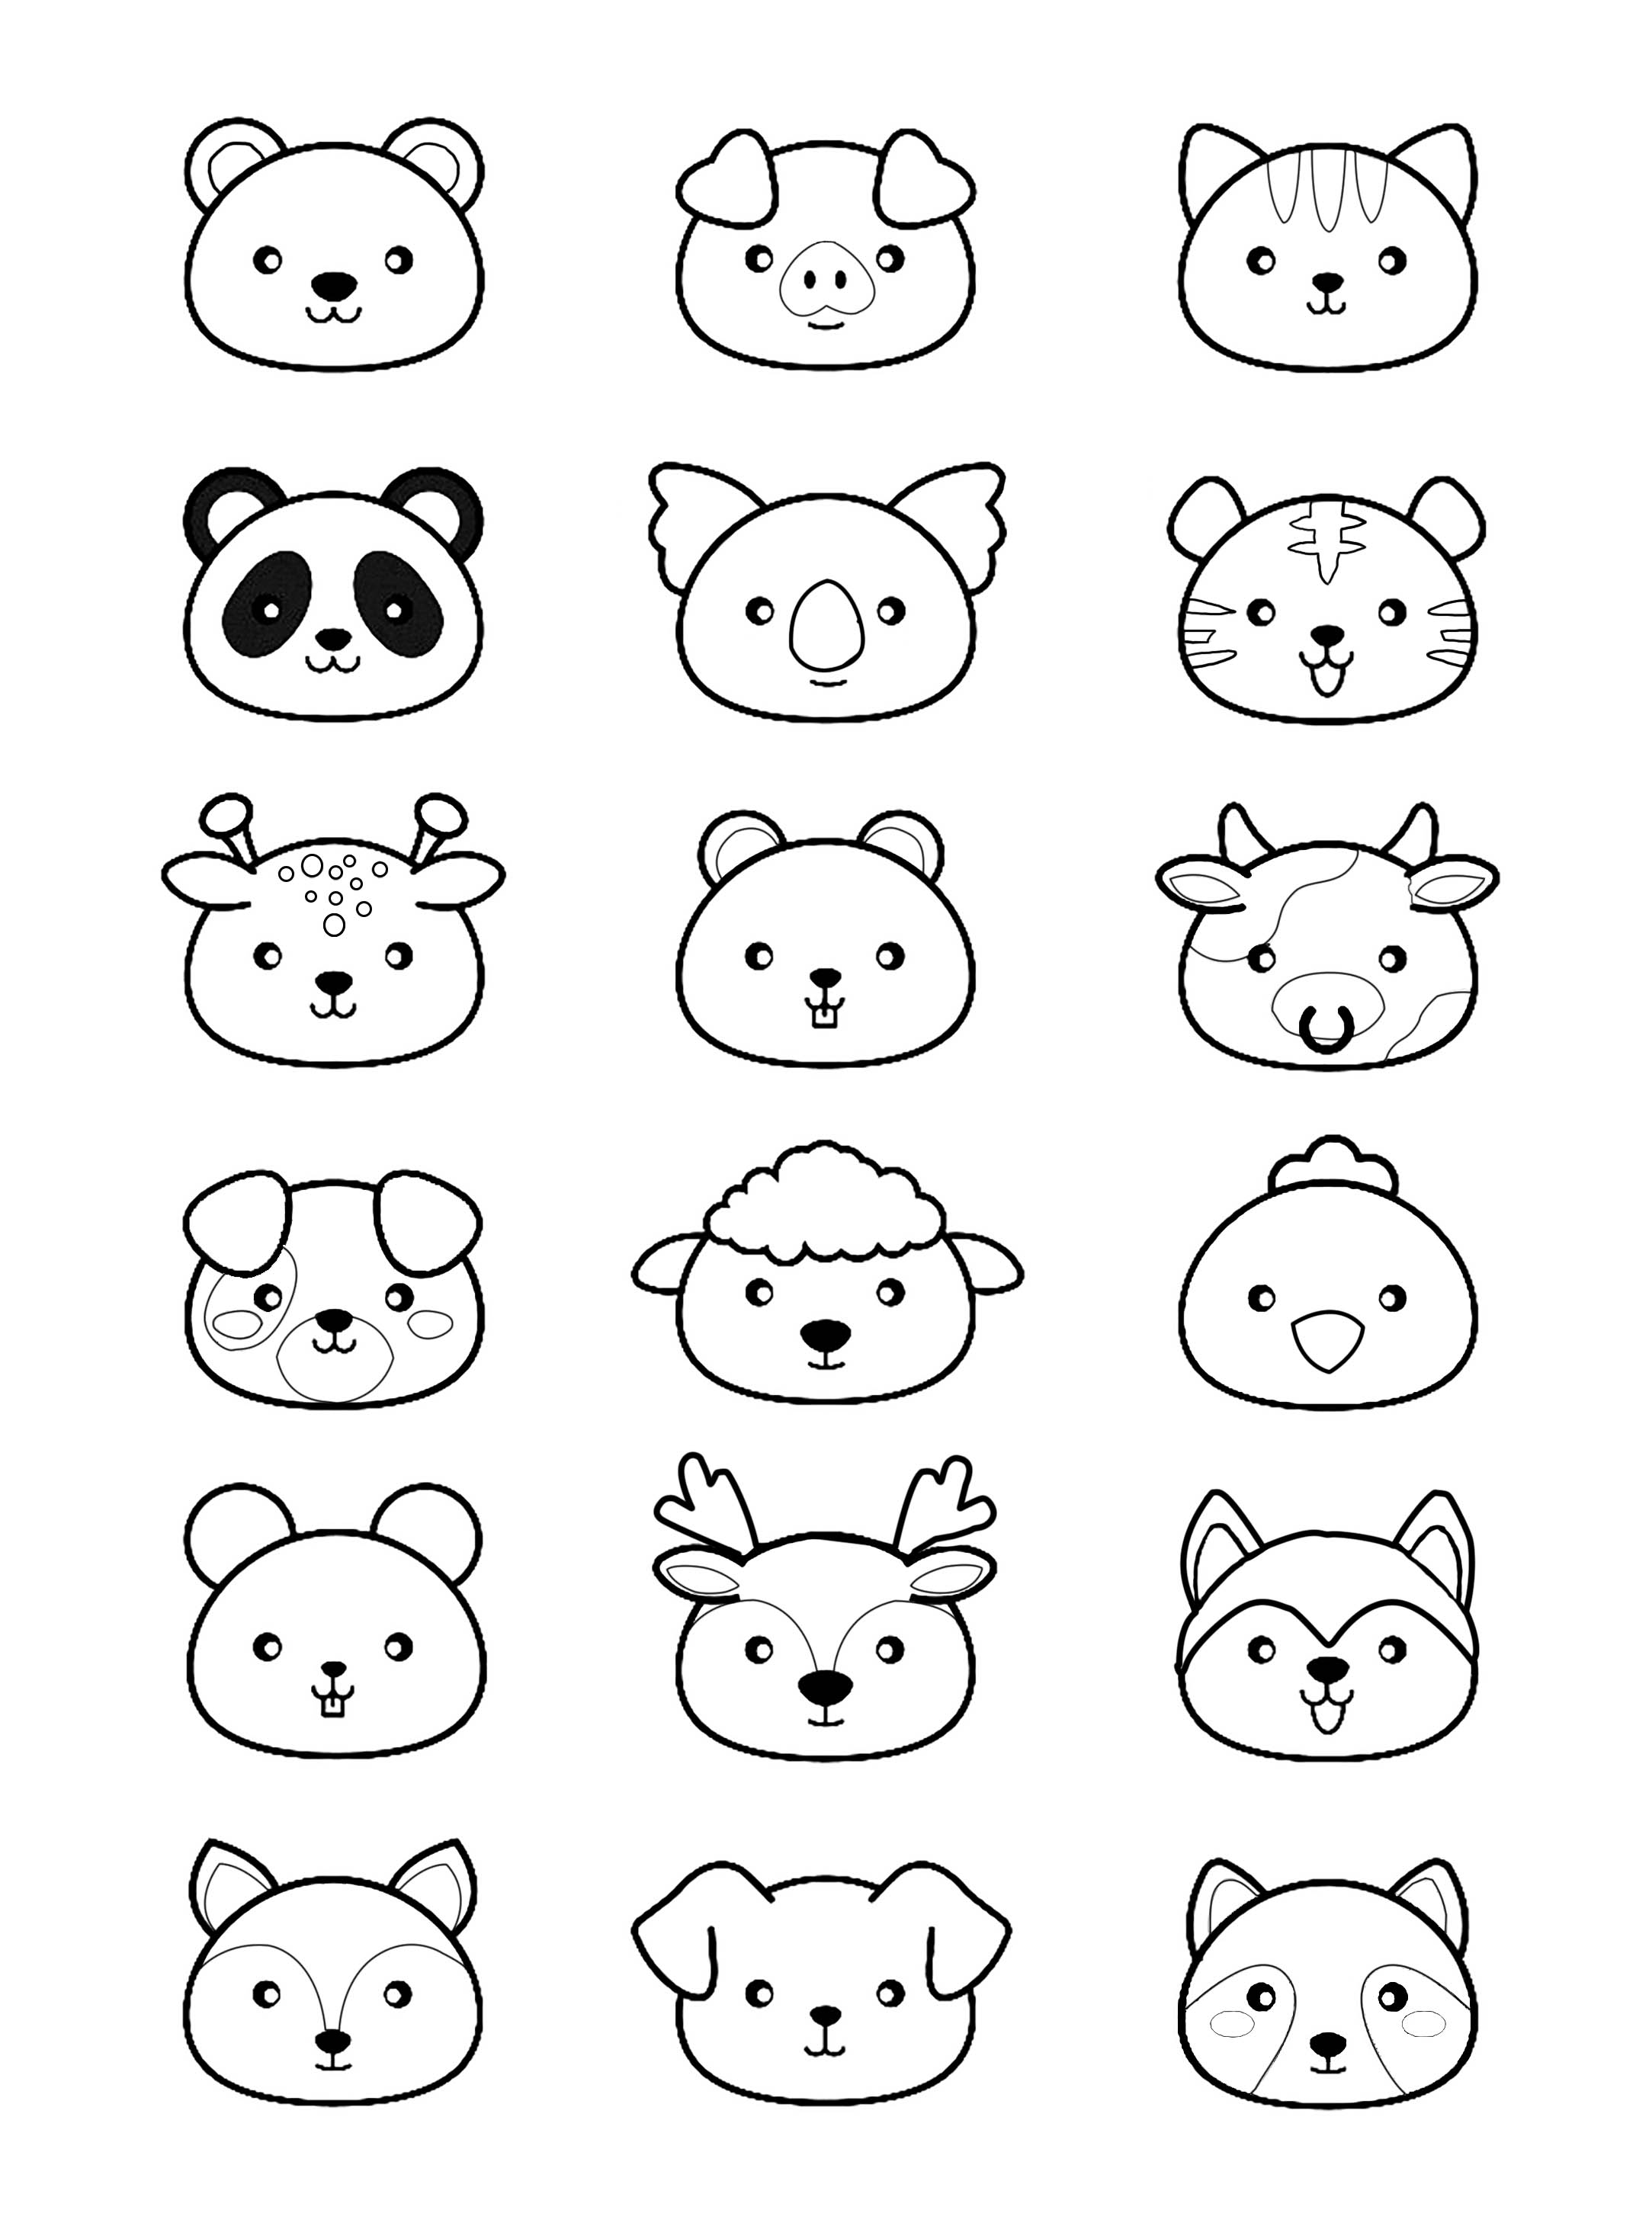 Kawaii free to color for children